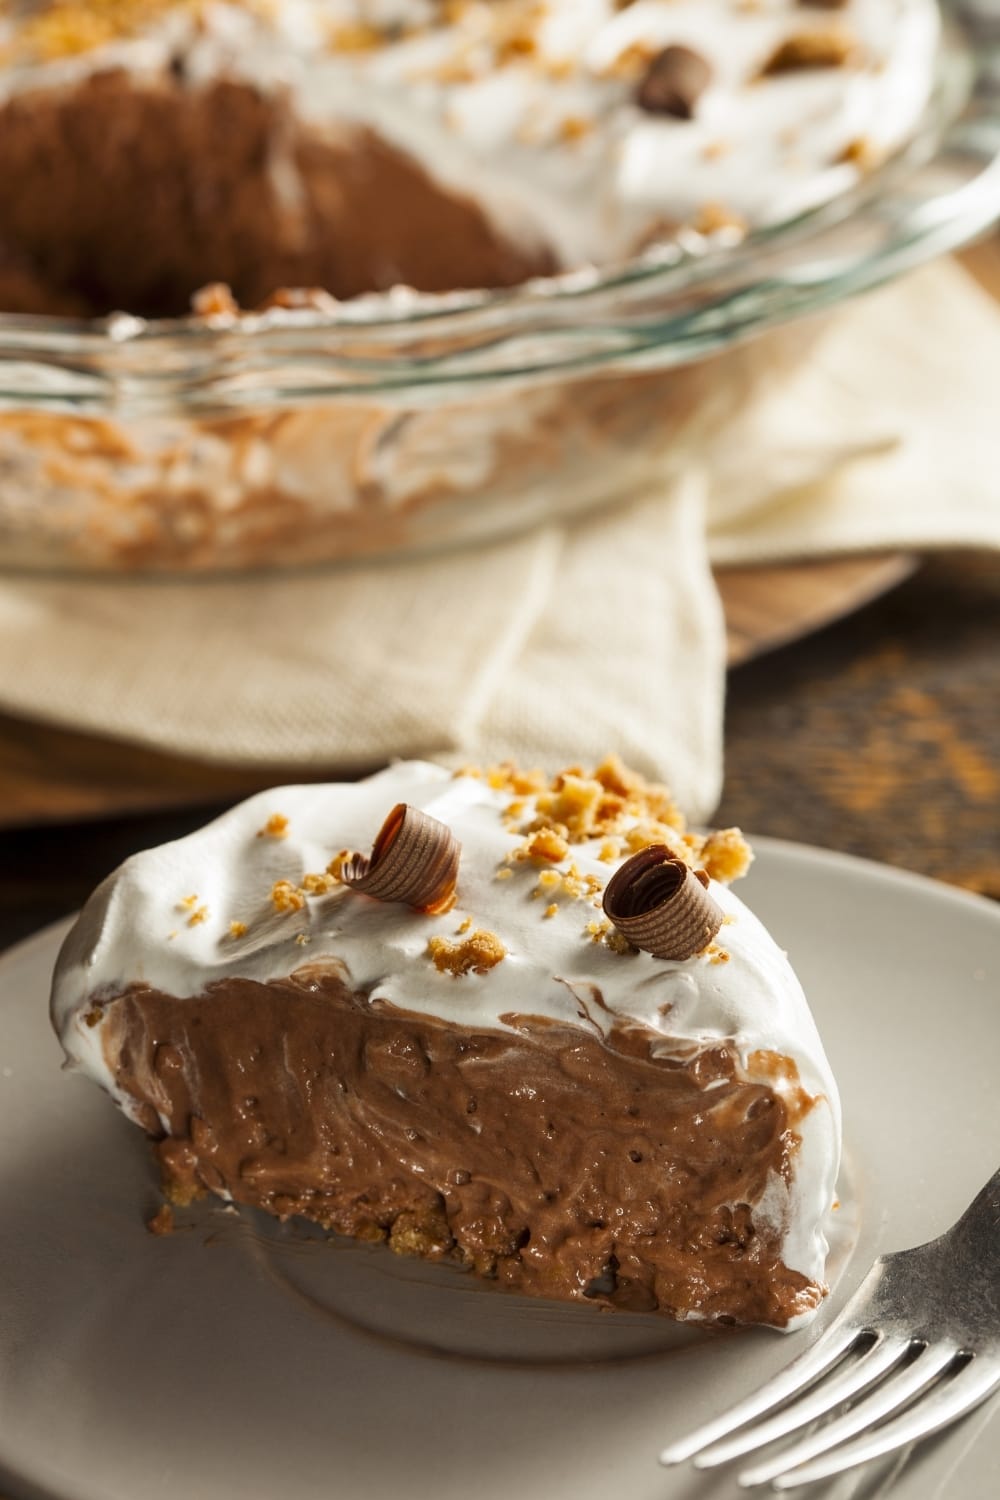 A slice of chocolate pie with whipped cream cover topped with chopped nuts and chocolate shavings. 